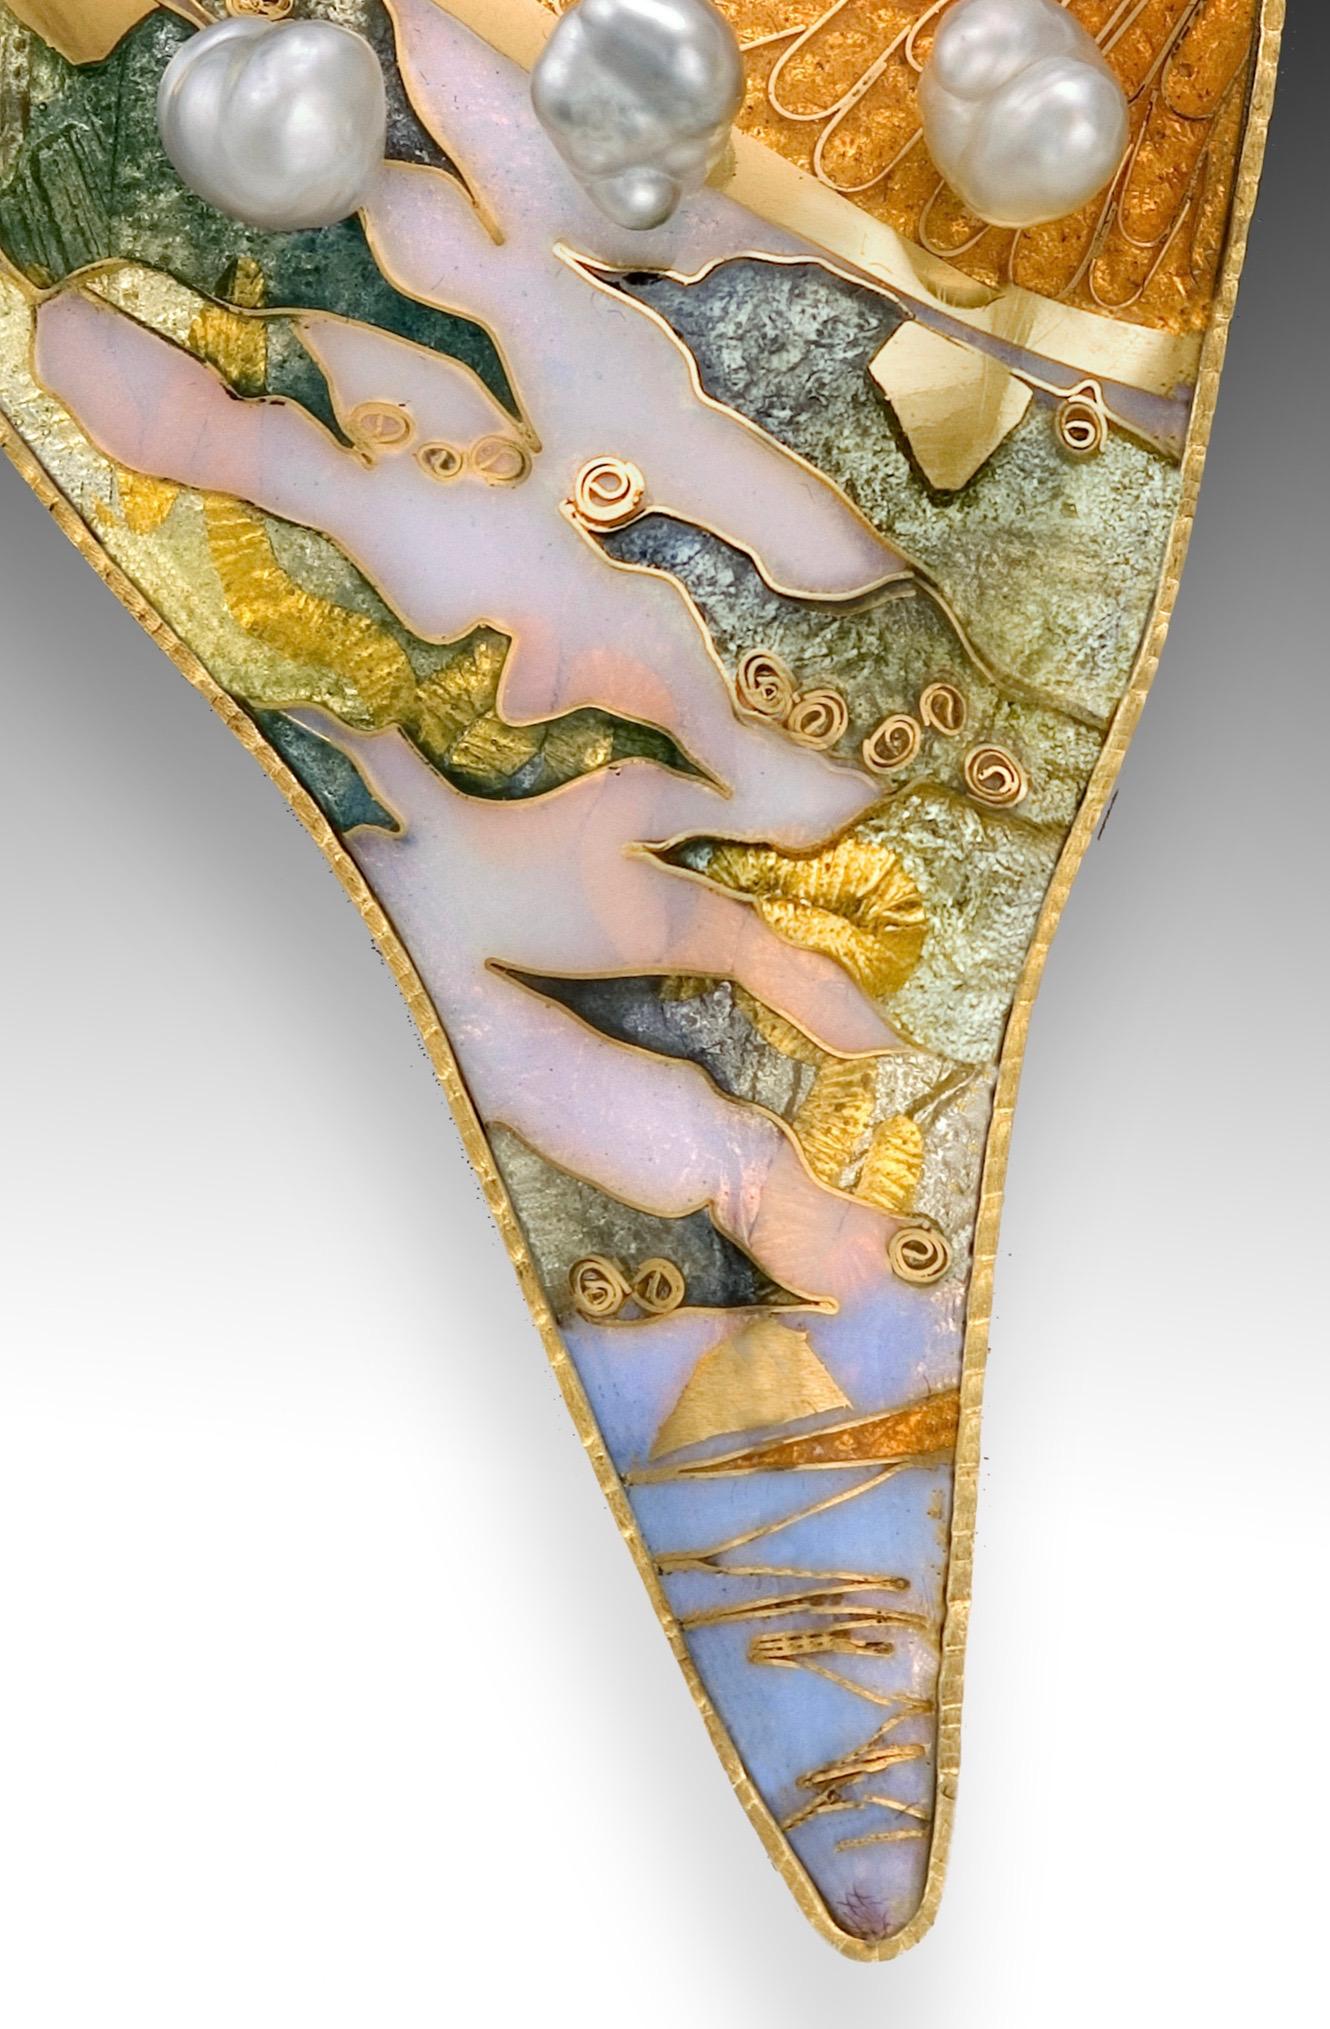 This painterly cloisonné enamel brooch is a one of a kind piece and named 